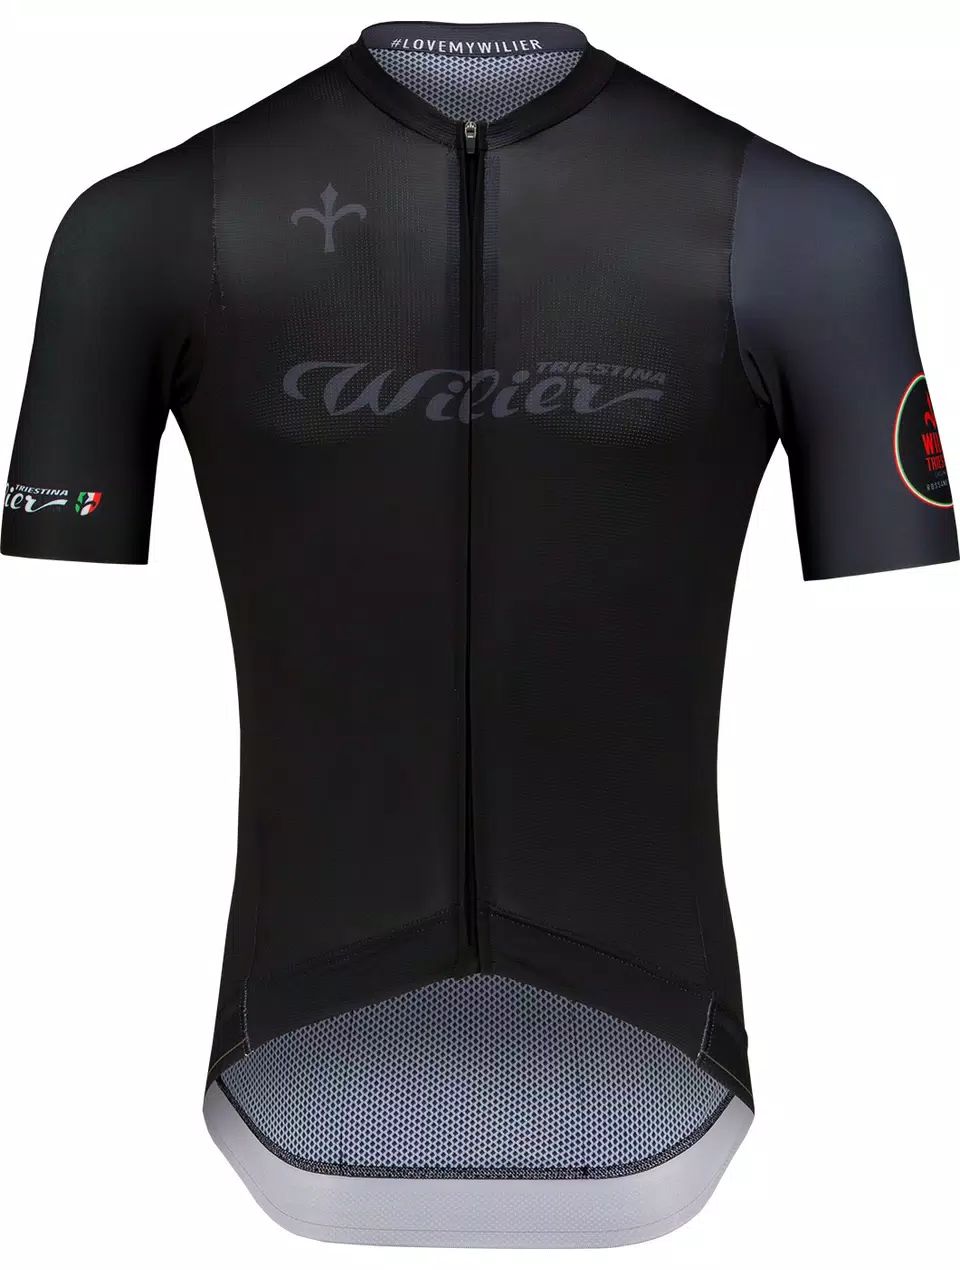 Maillot hombre Wilier Cycling Club negro